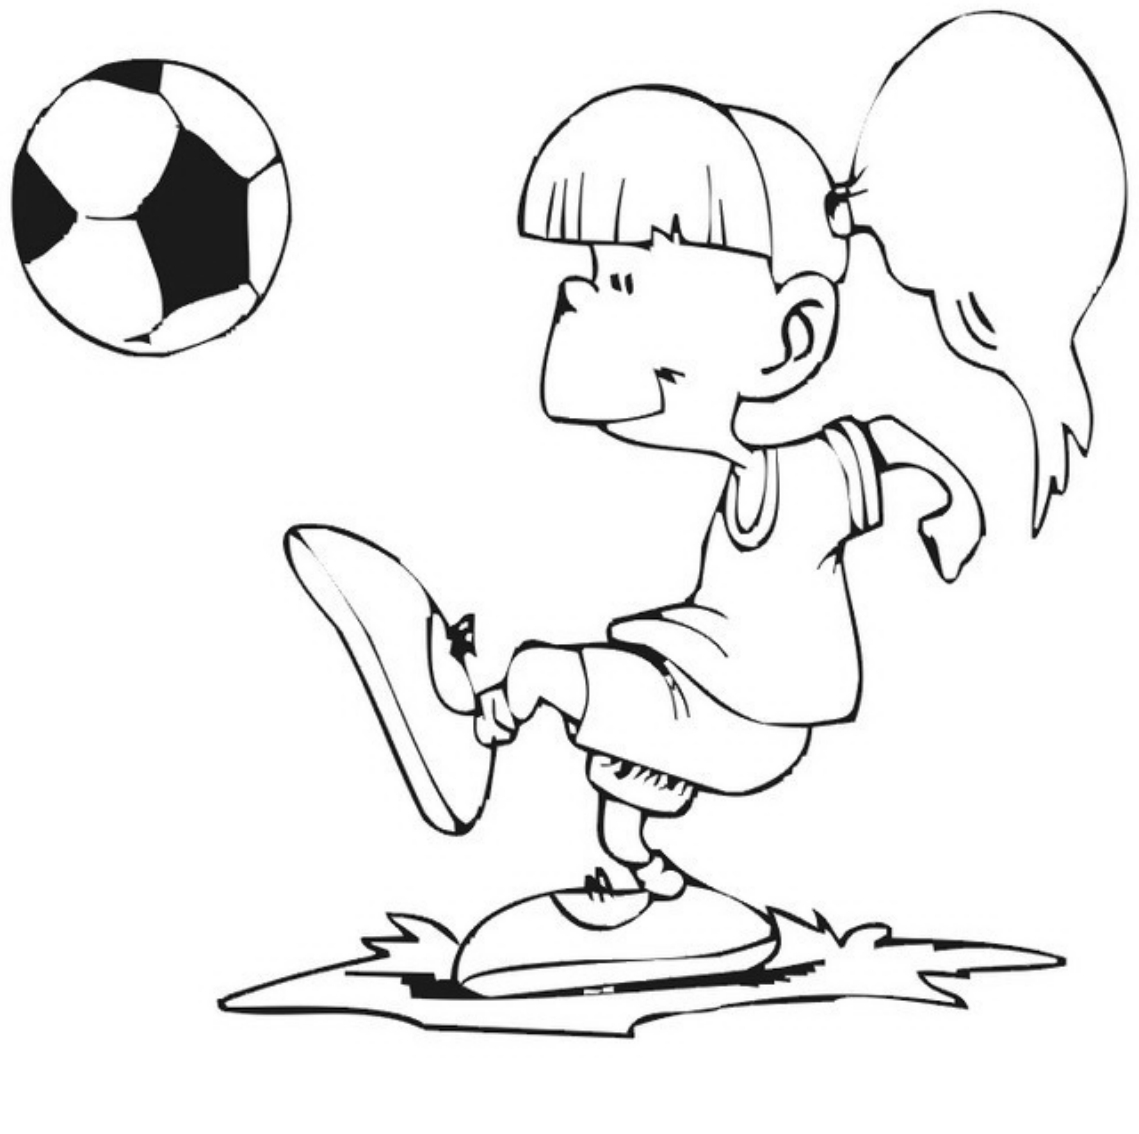 Soccer 9 drawing to print and color